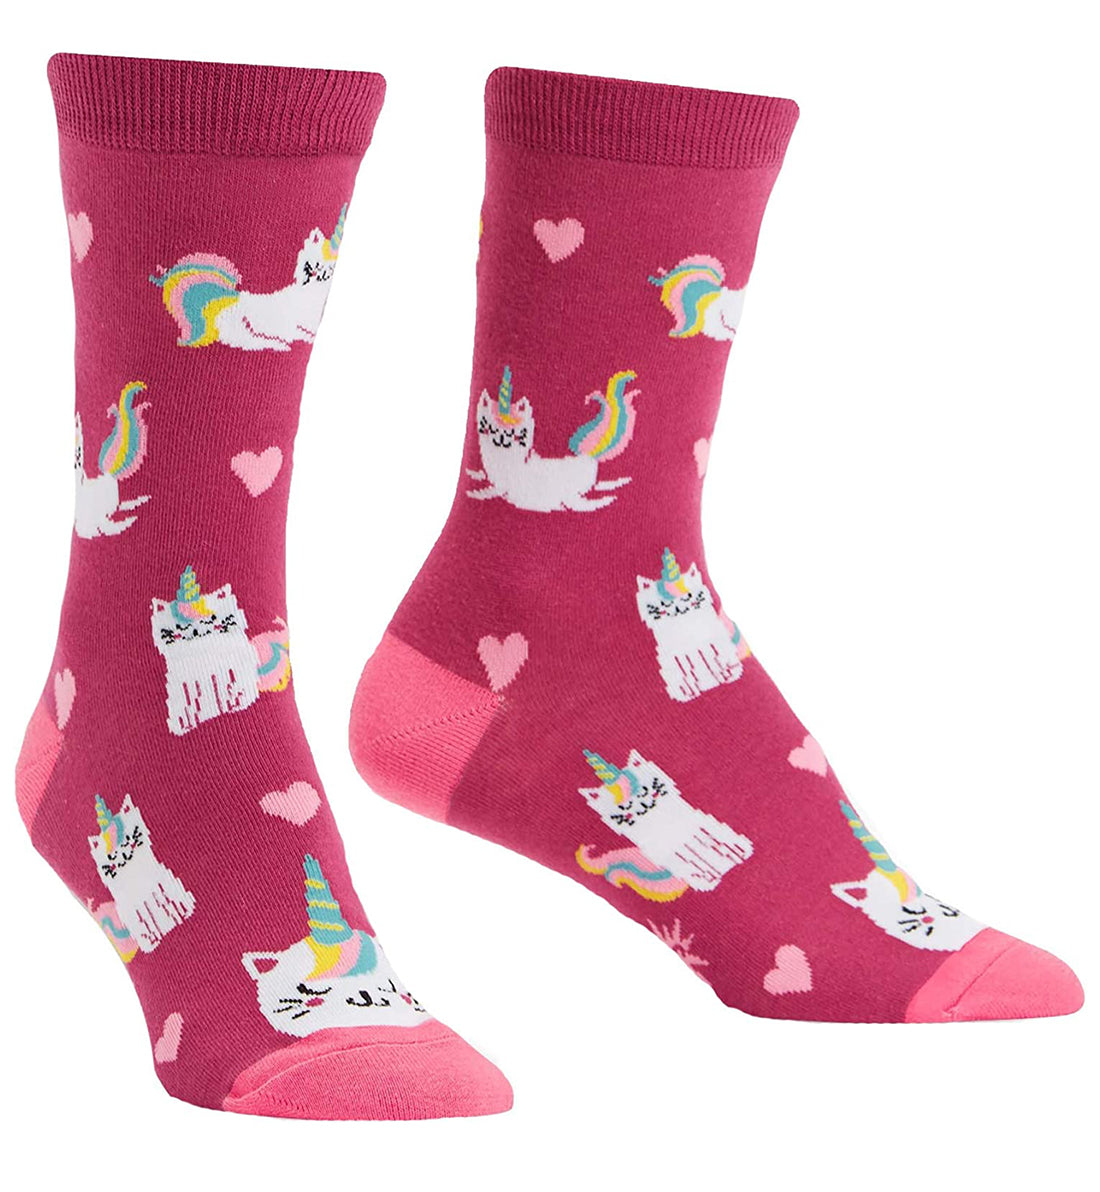 SOCK it to me Women&#39;s Crew Socks (w0201),Look At Me Meow - Look At Me Meow,One Size